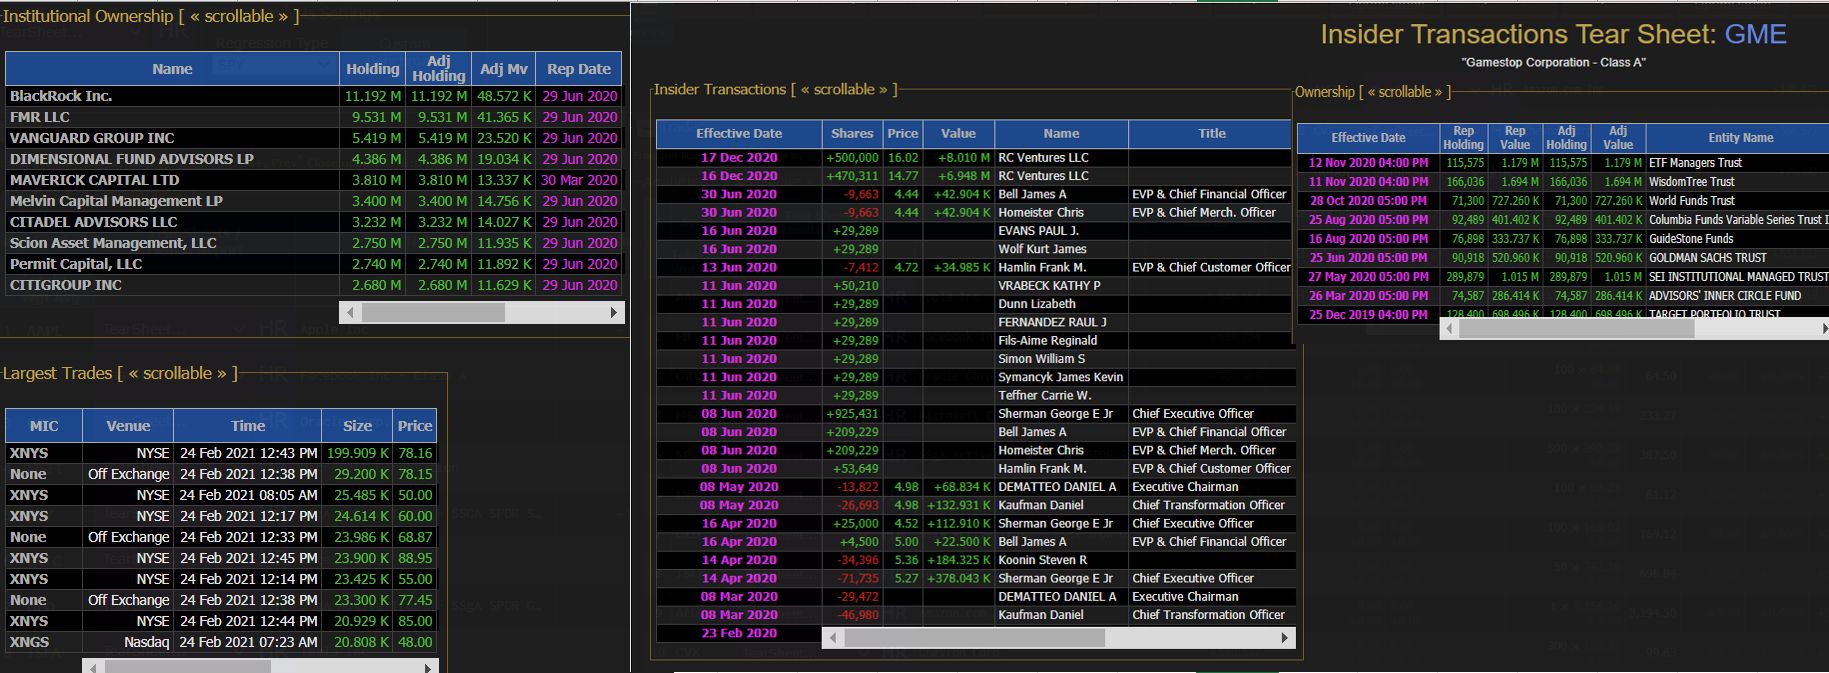 Insider Transactions, Institutional Ownership, and Largest Trades can instantly be viewed.